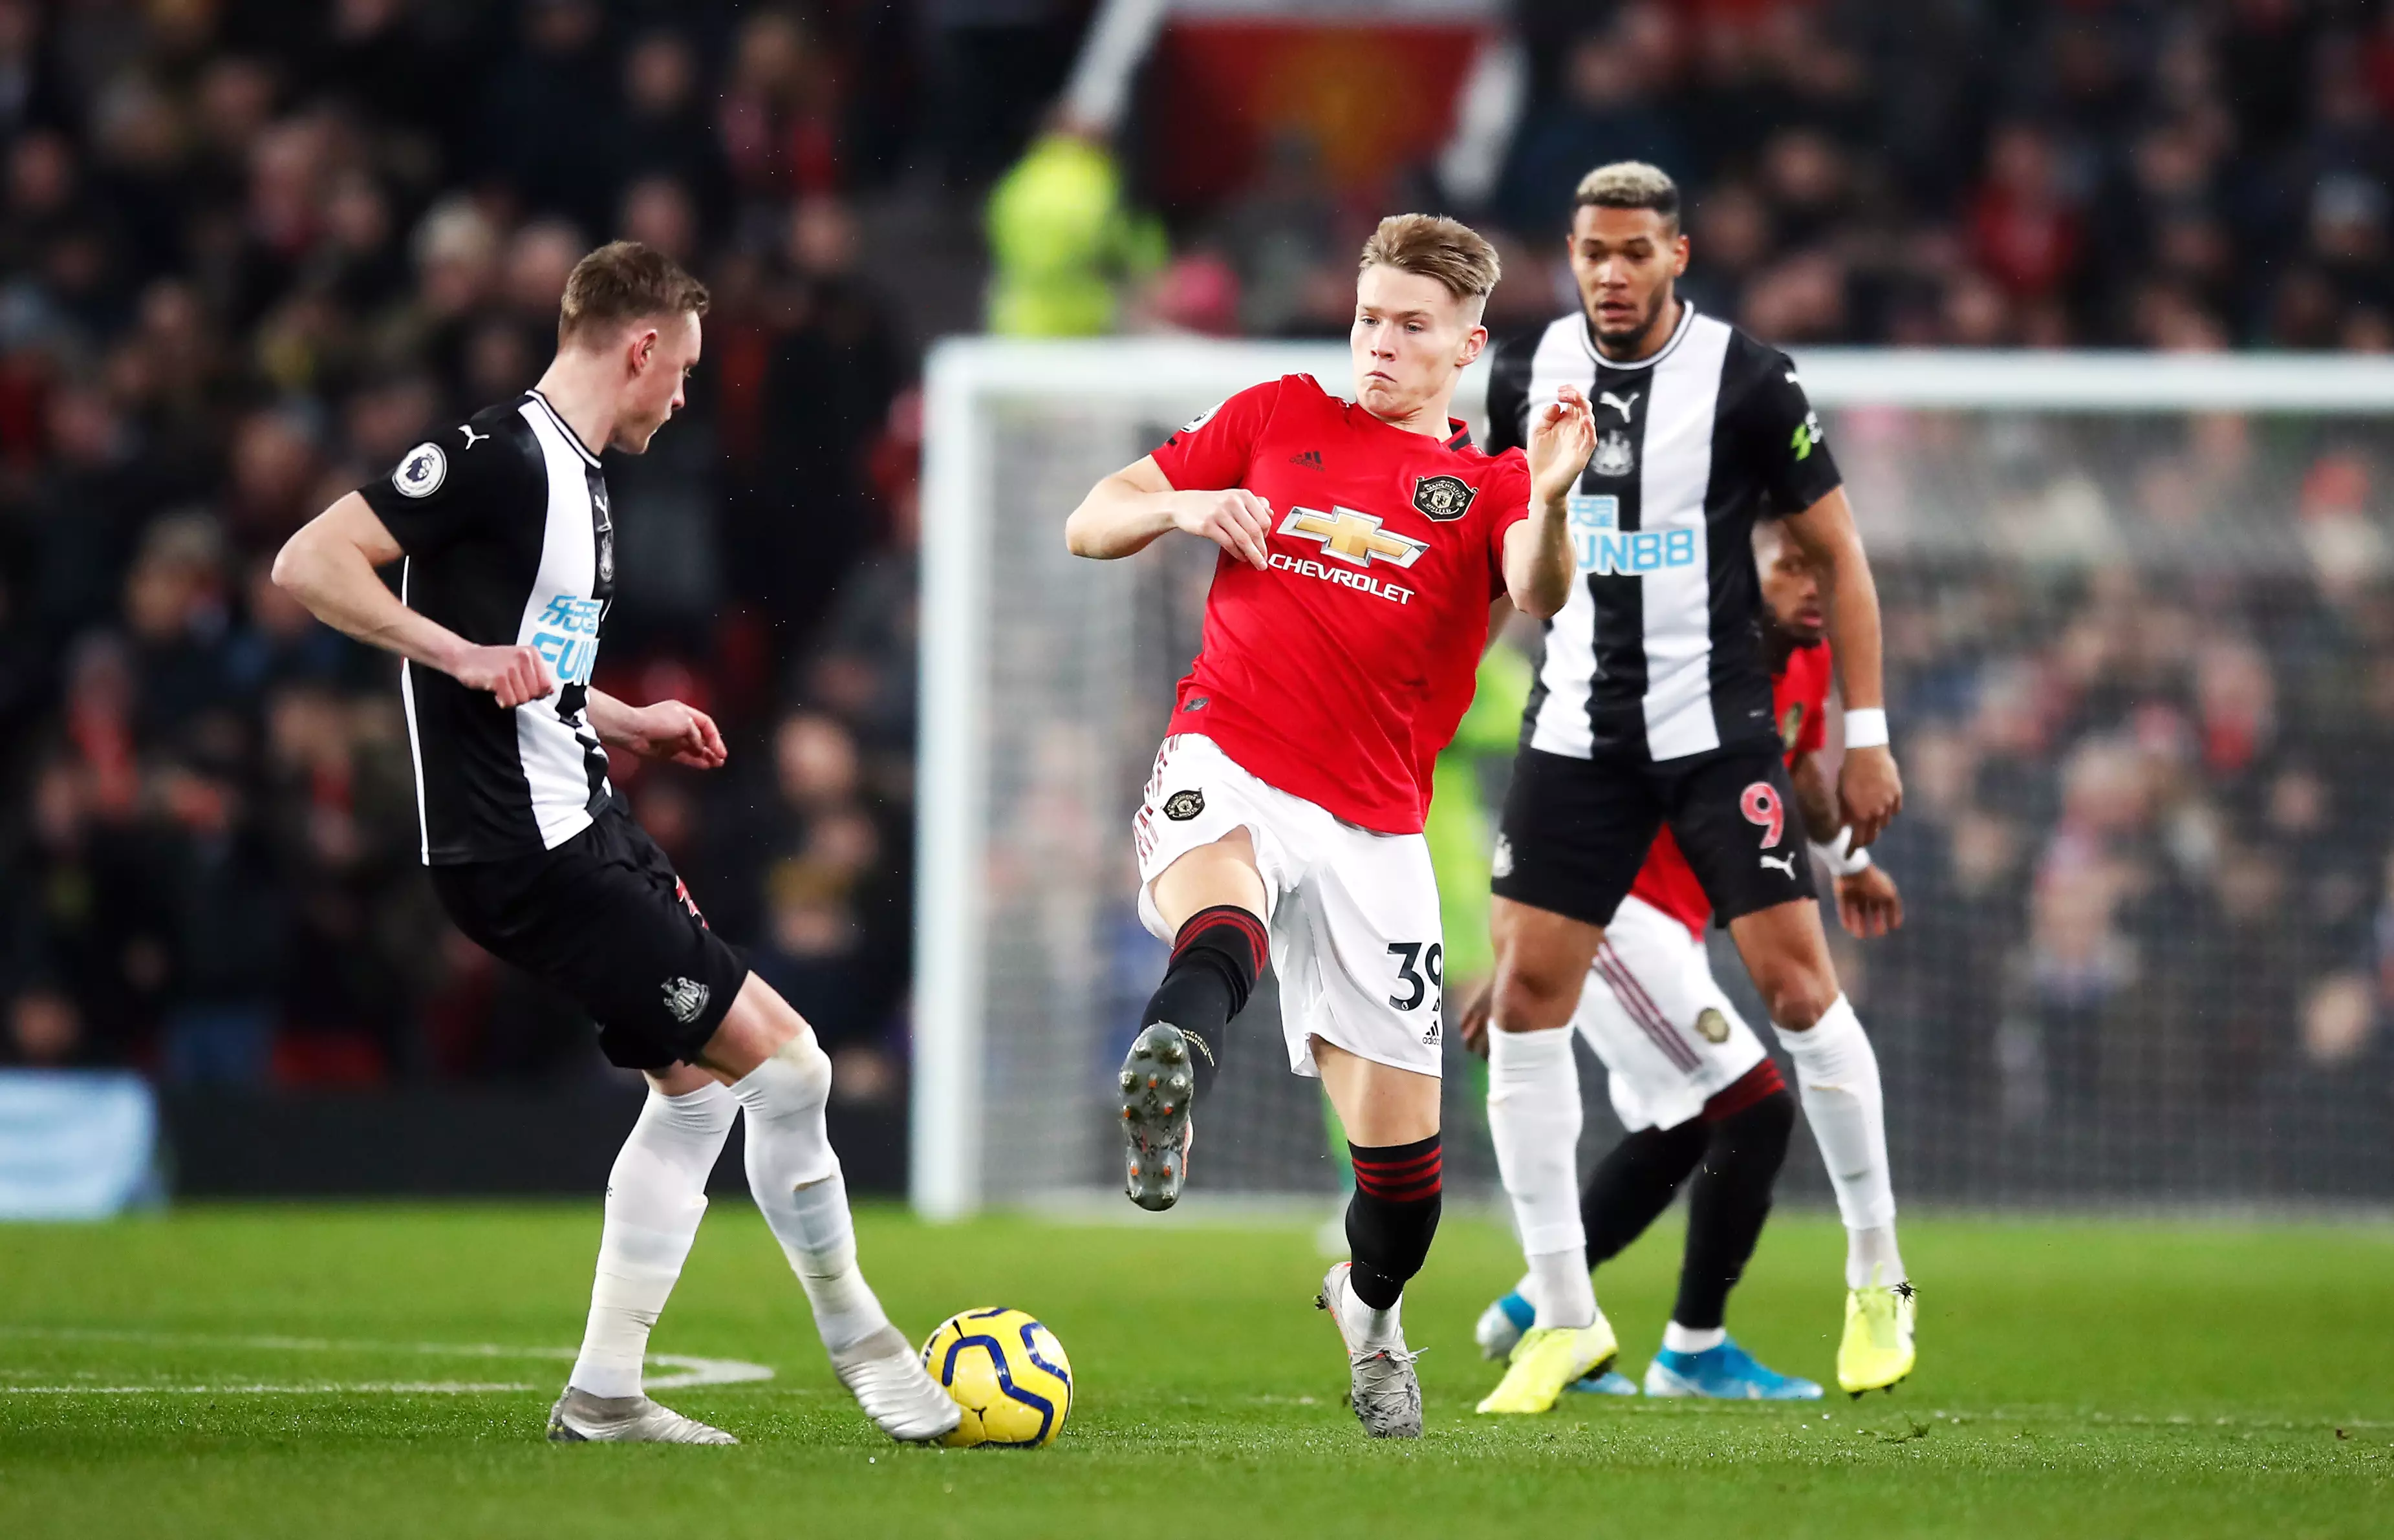 Scott McTominay could've seen red for an early challenge on Sean Longstaff